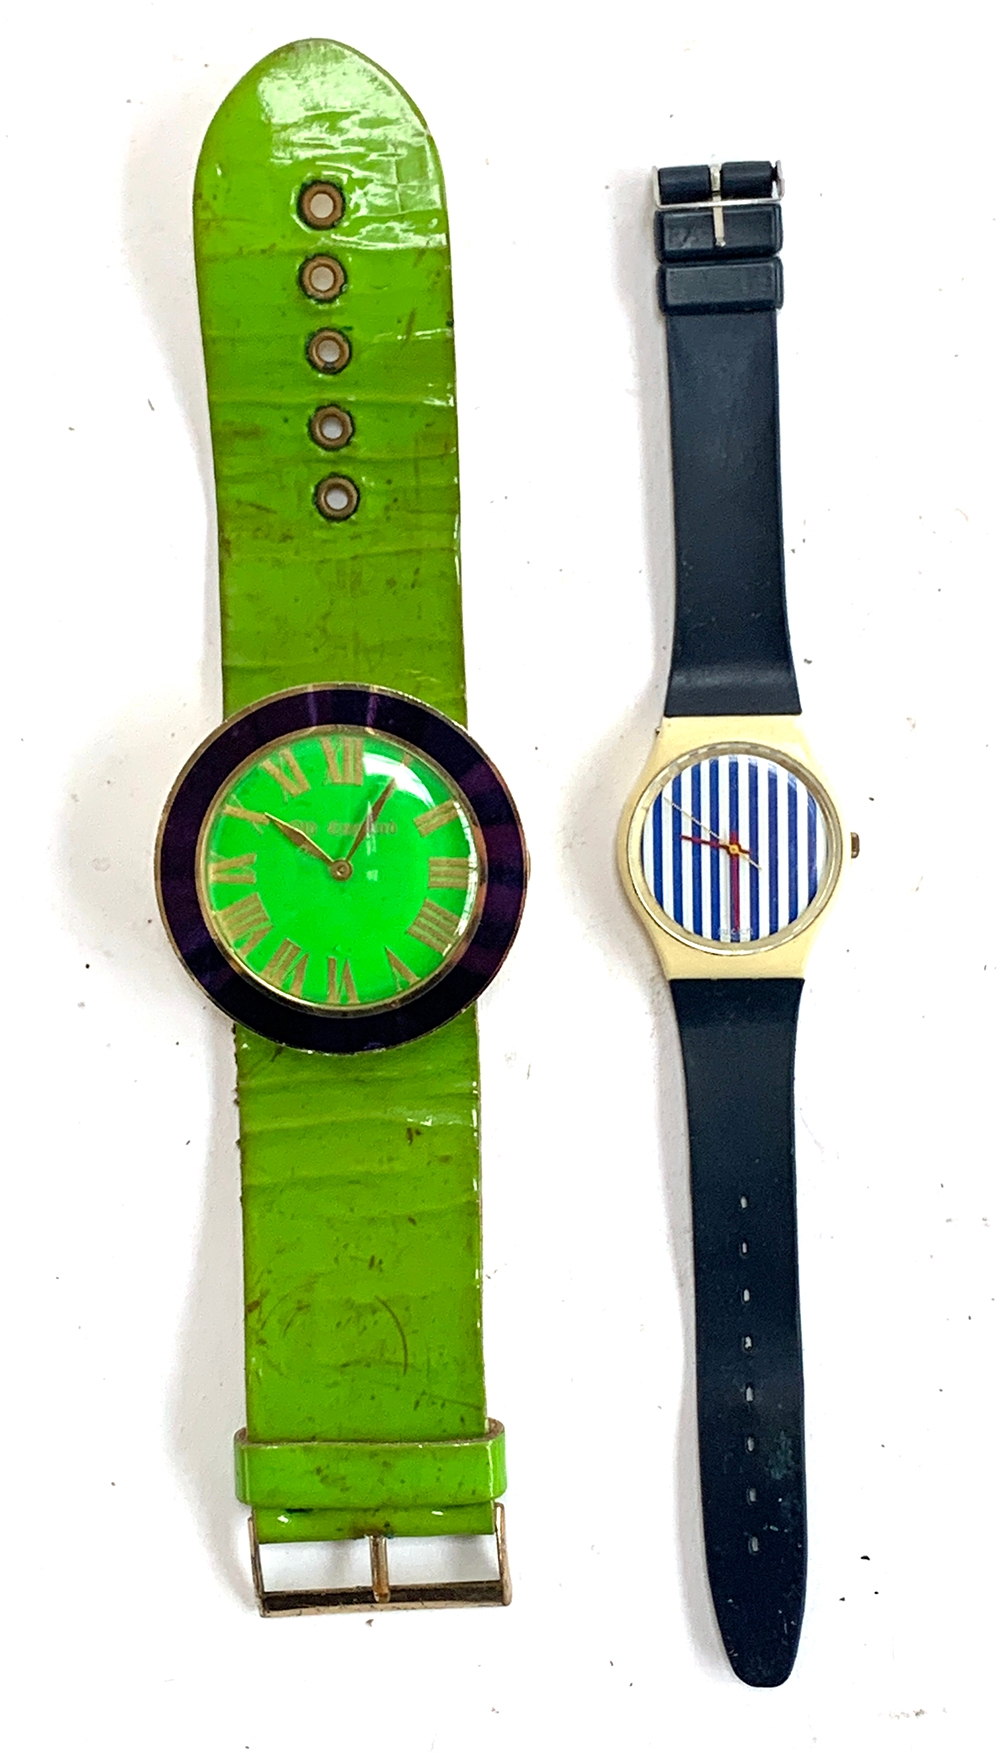 A Swatch watch with blue and white striped face, together with an Old England watch